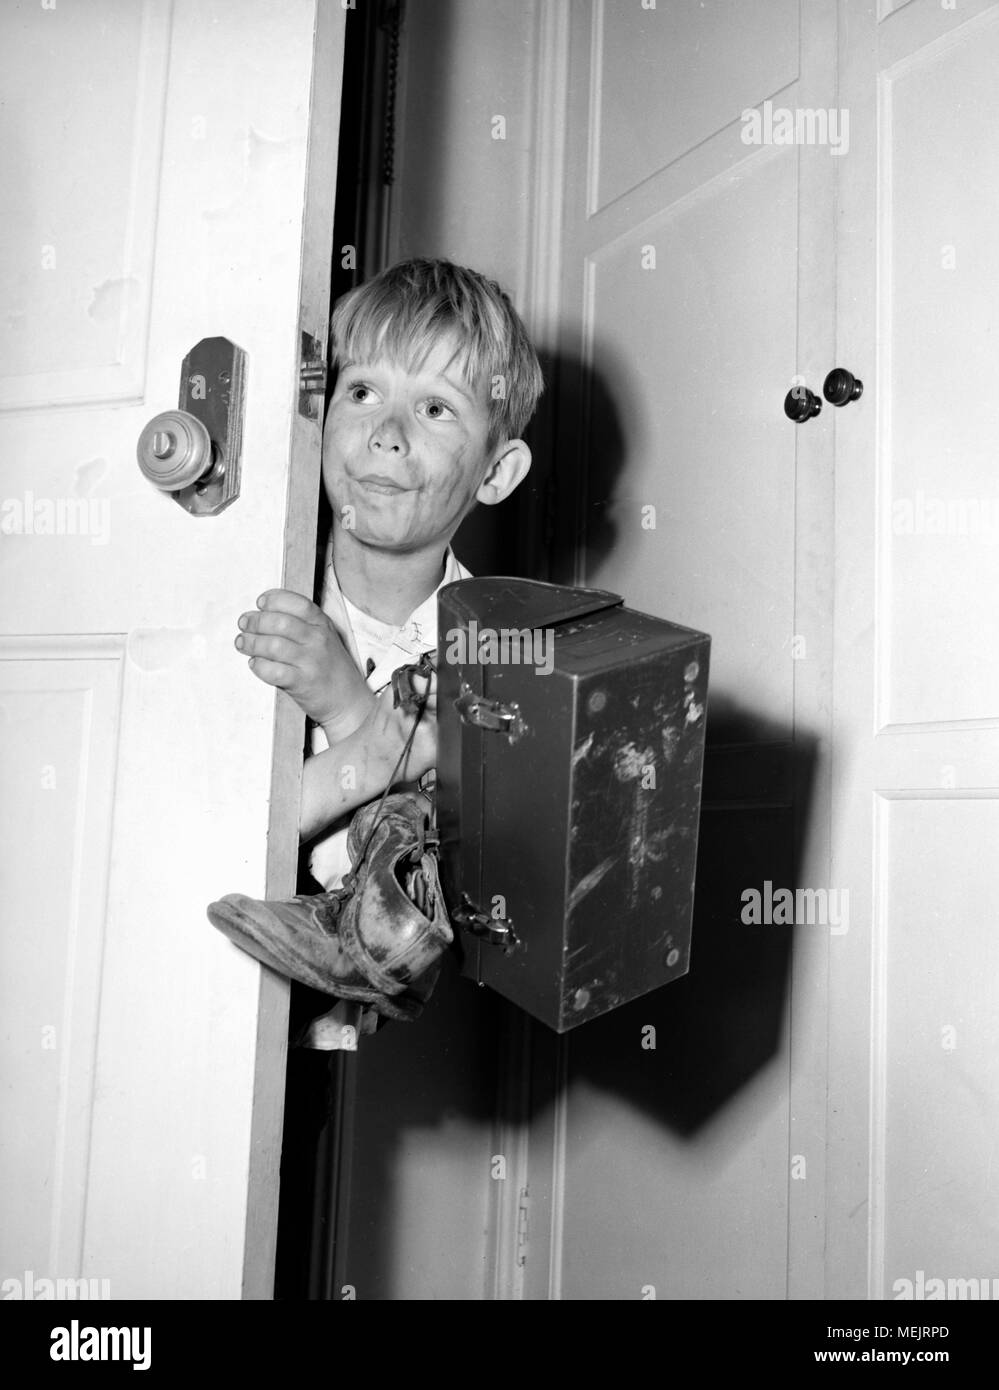 A young boy warily comes in the house with his dirty clothes, muddy shoes, and his lunch box after school, ca. 1964. Stock Photo